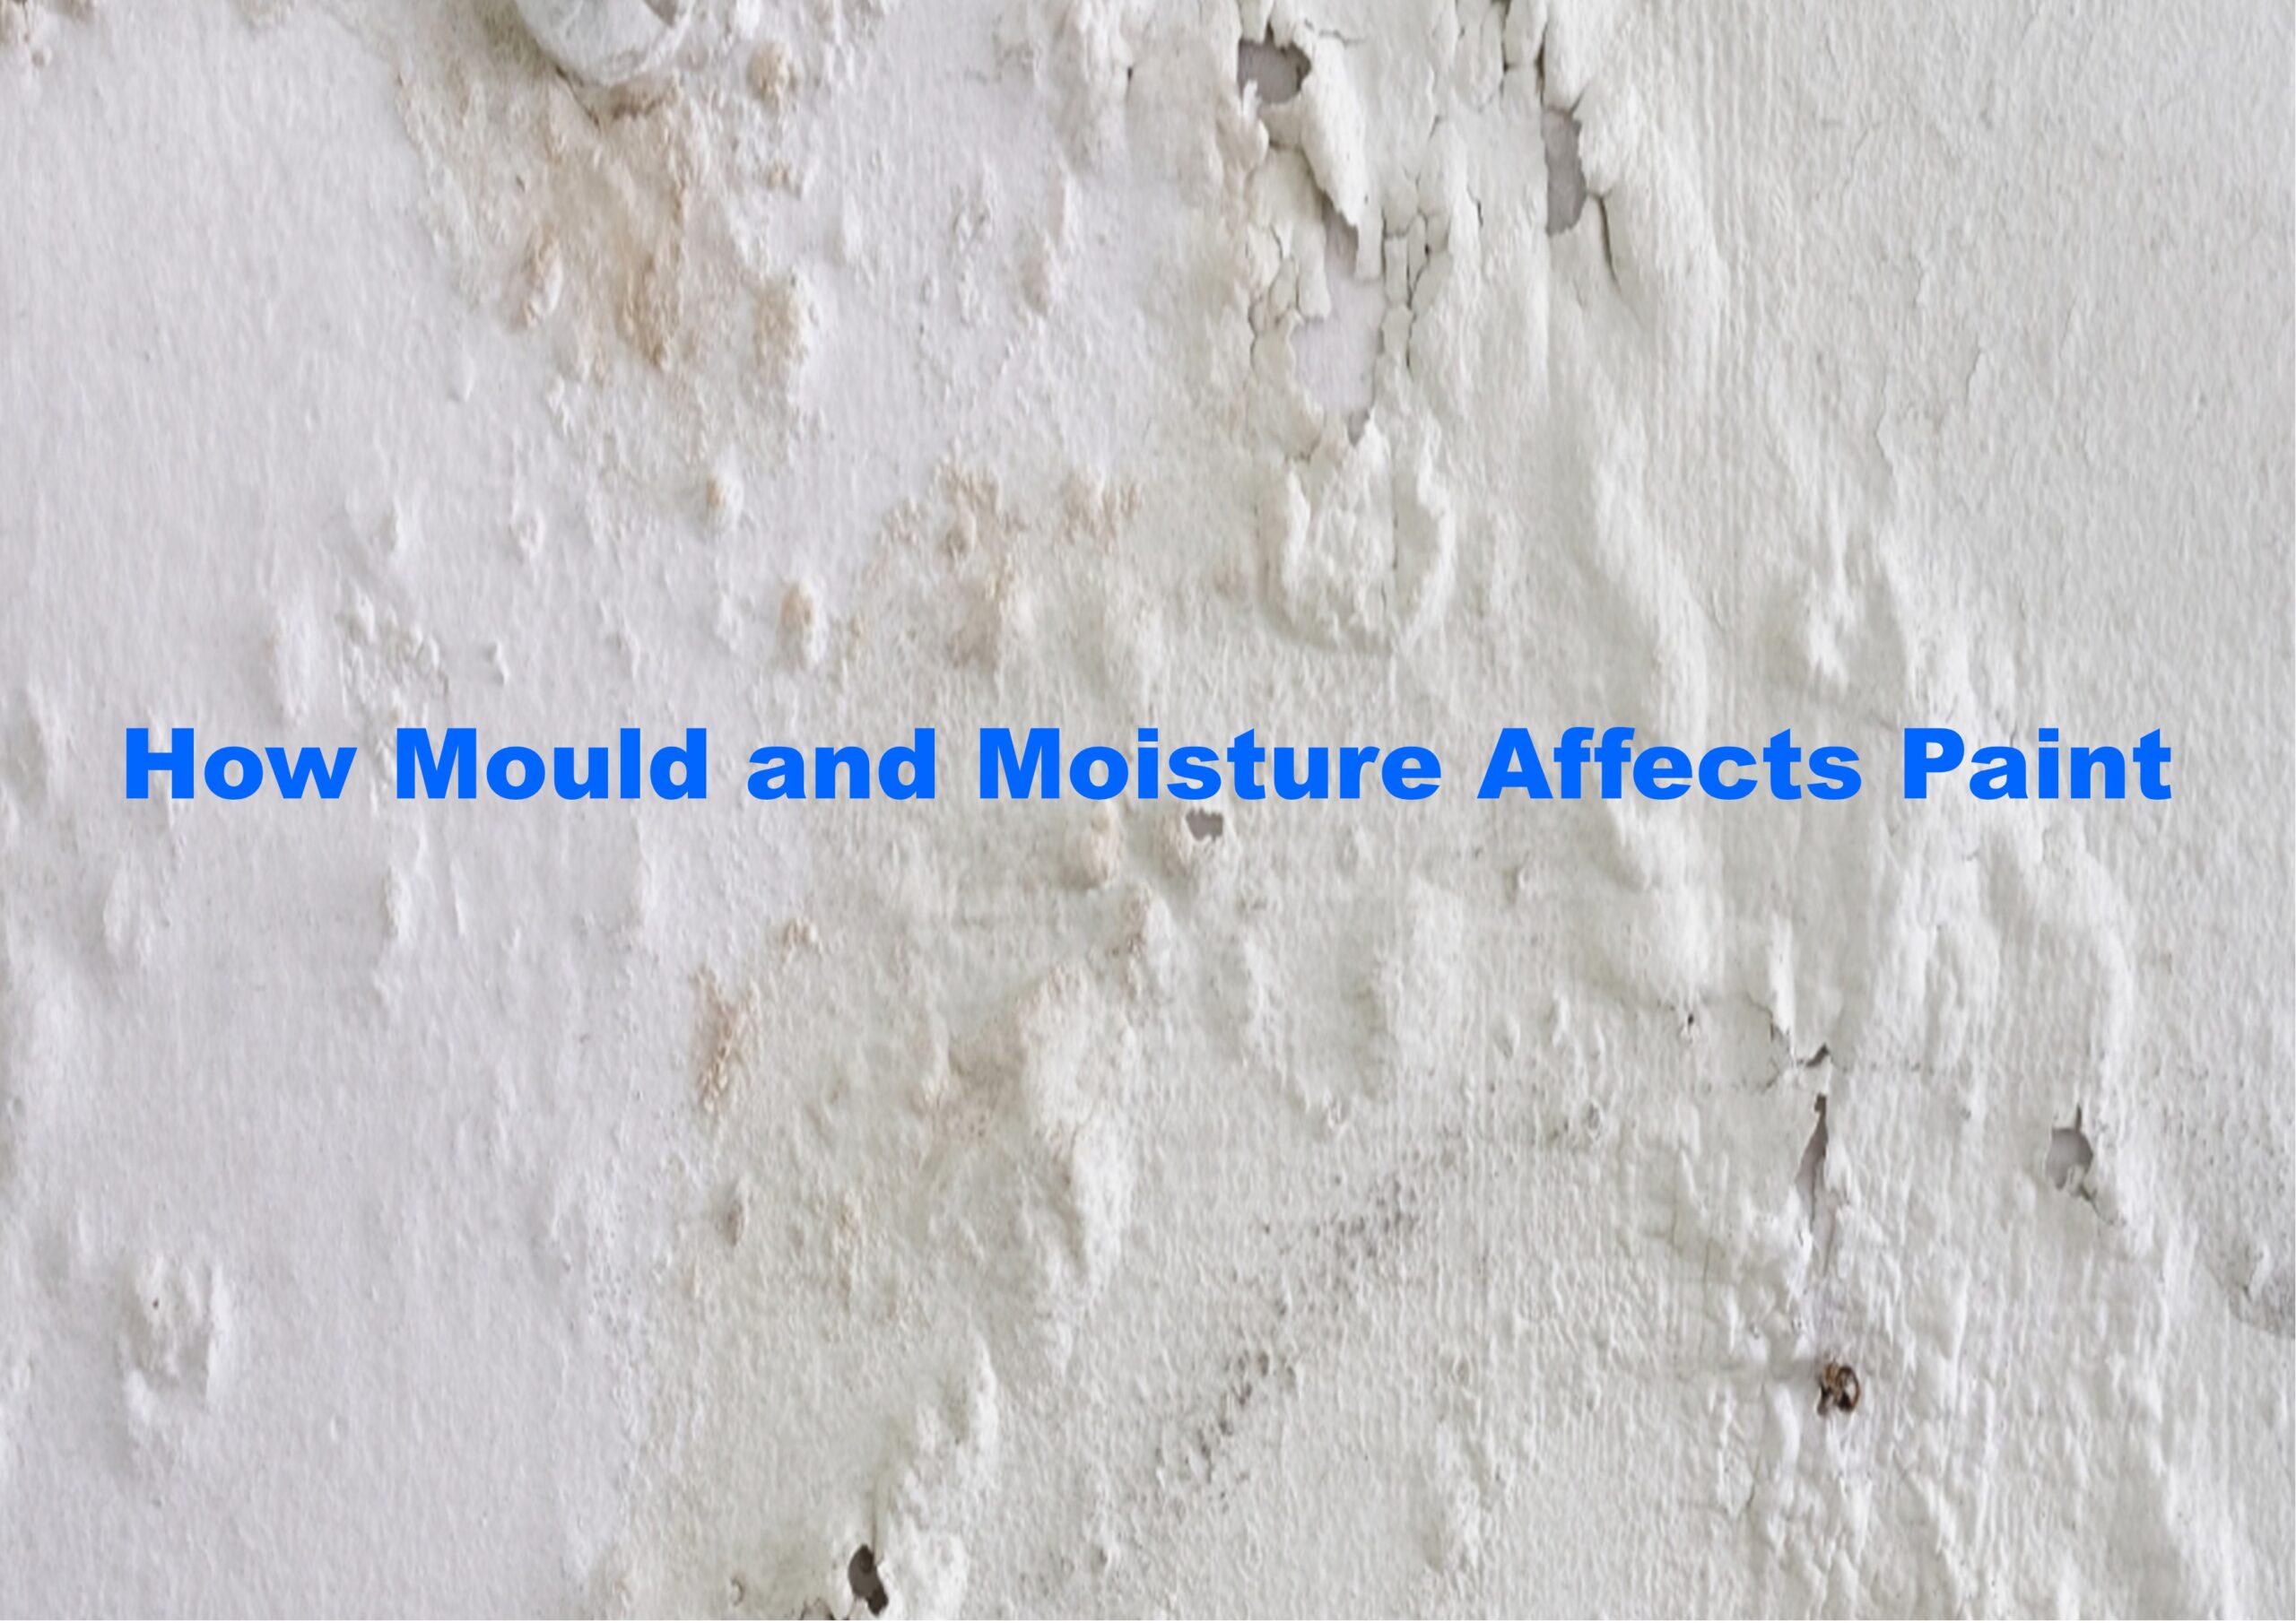 How mould and moisture affects paint